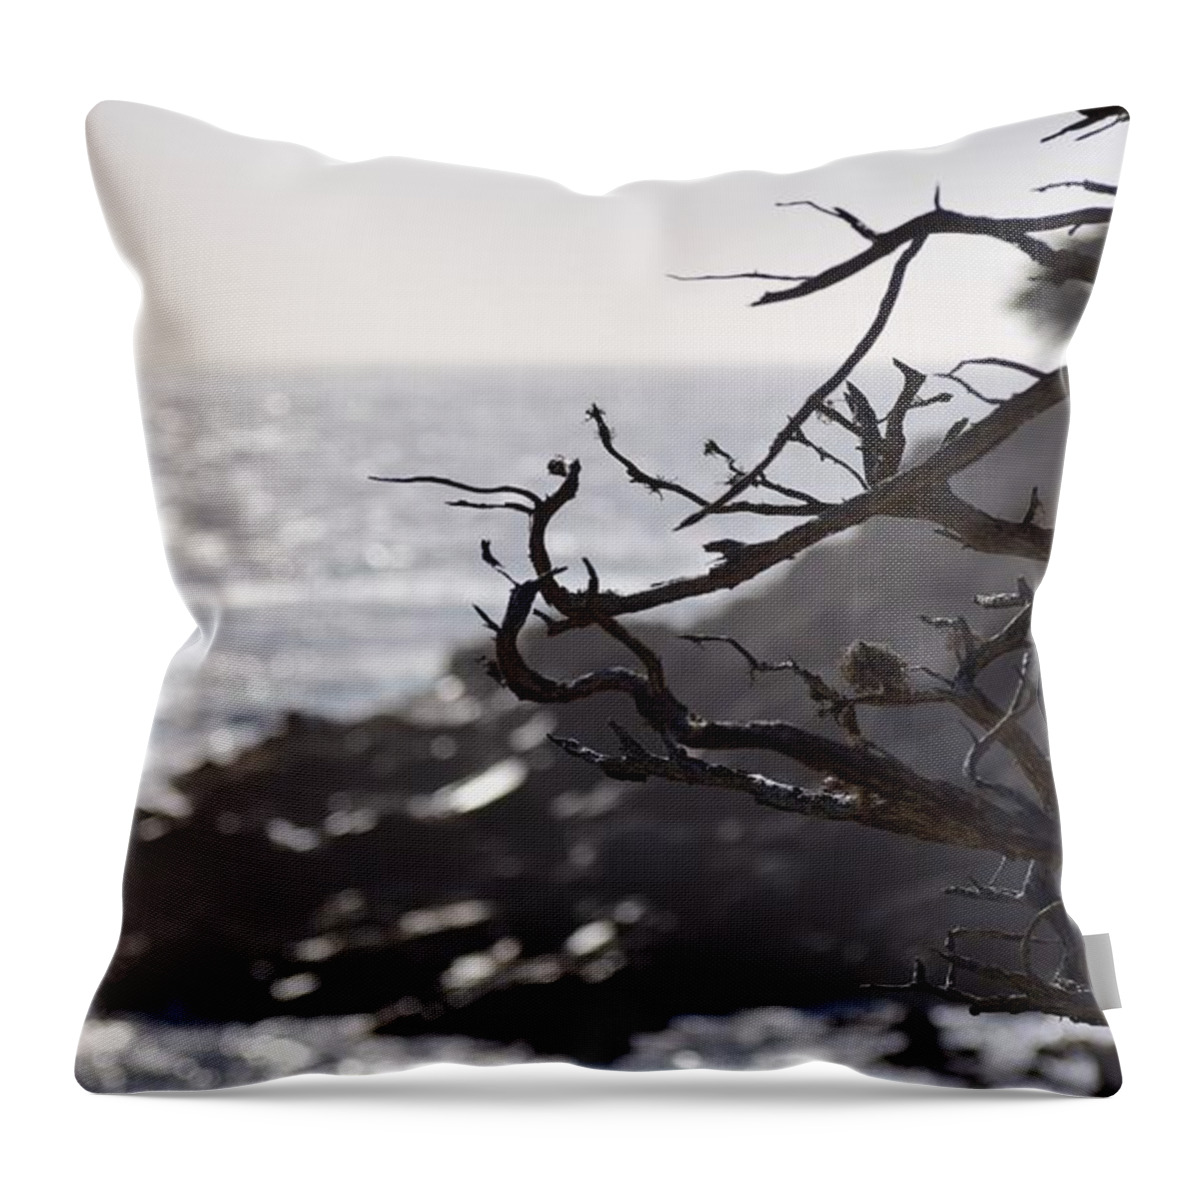 17 Mile Drive Throw Pillow featuring the photograph 17 Mile Drive by Sandy Taylor